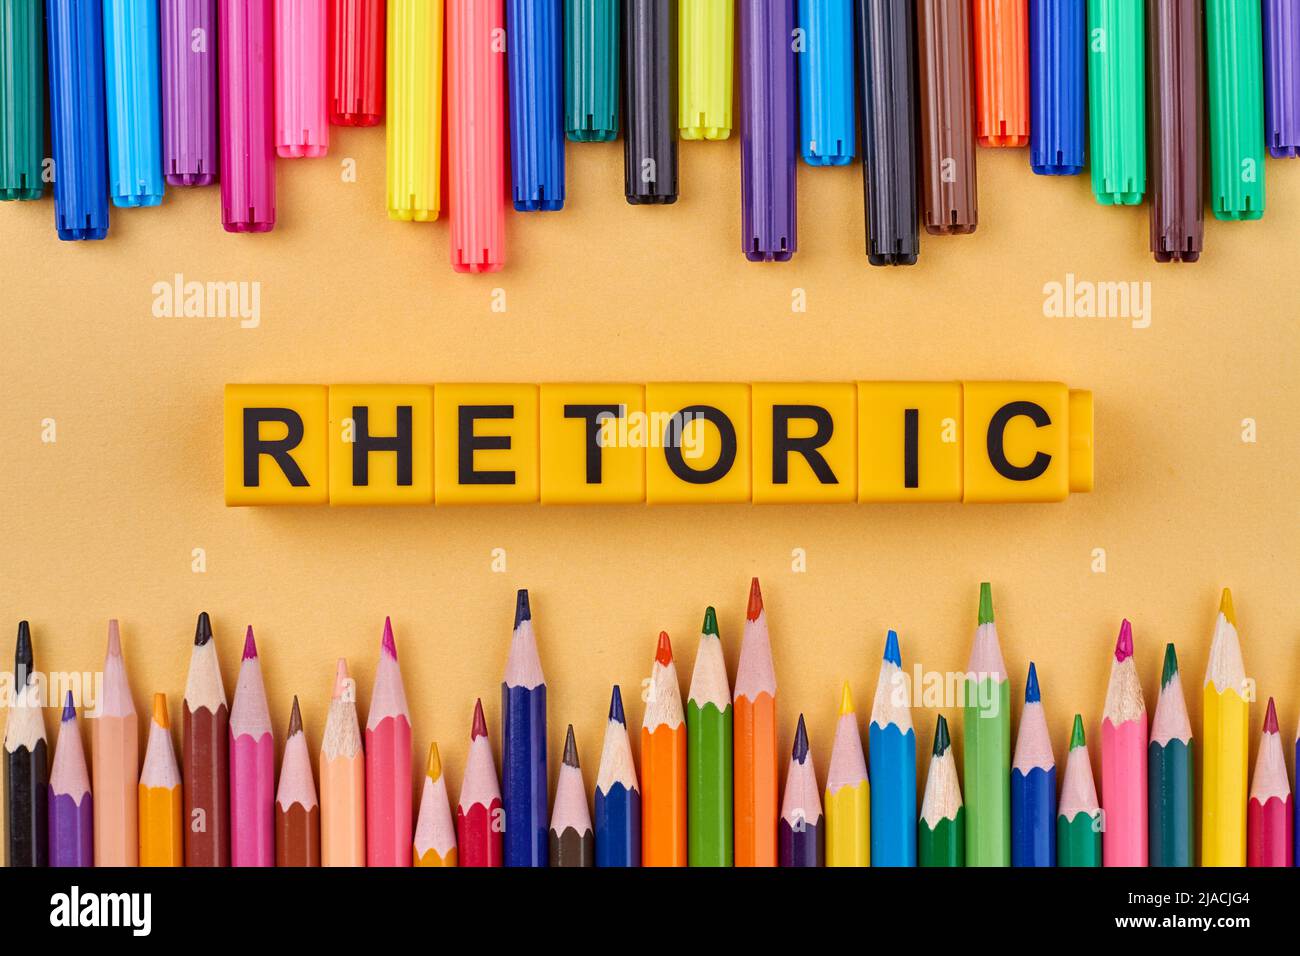 Flat lay composition with colorful pencils and word rhetoric written on yellow cubes. Education concept. Stock Photo